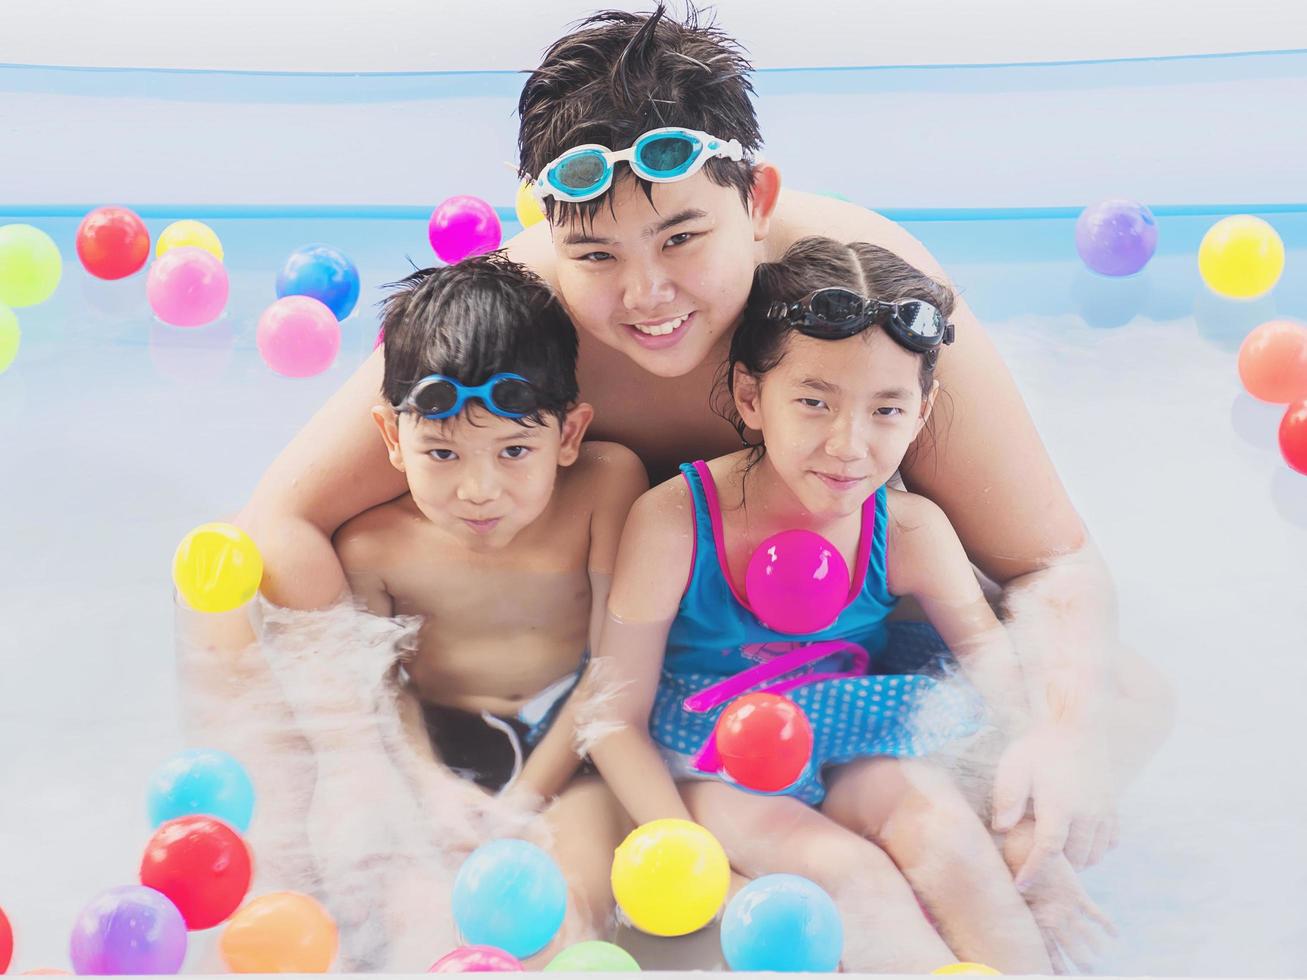 Asian brotherhood are playing in a kid water pool with colorful balls. Photo is focused at the biggest kid's face.